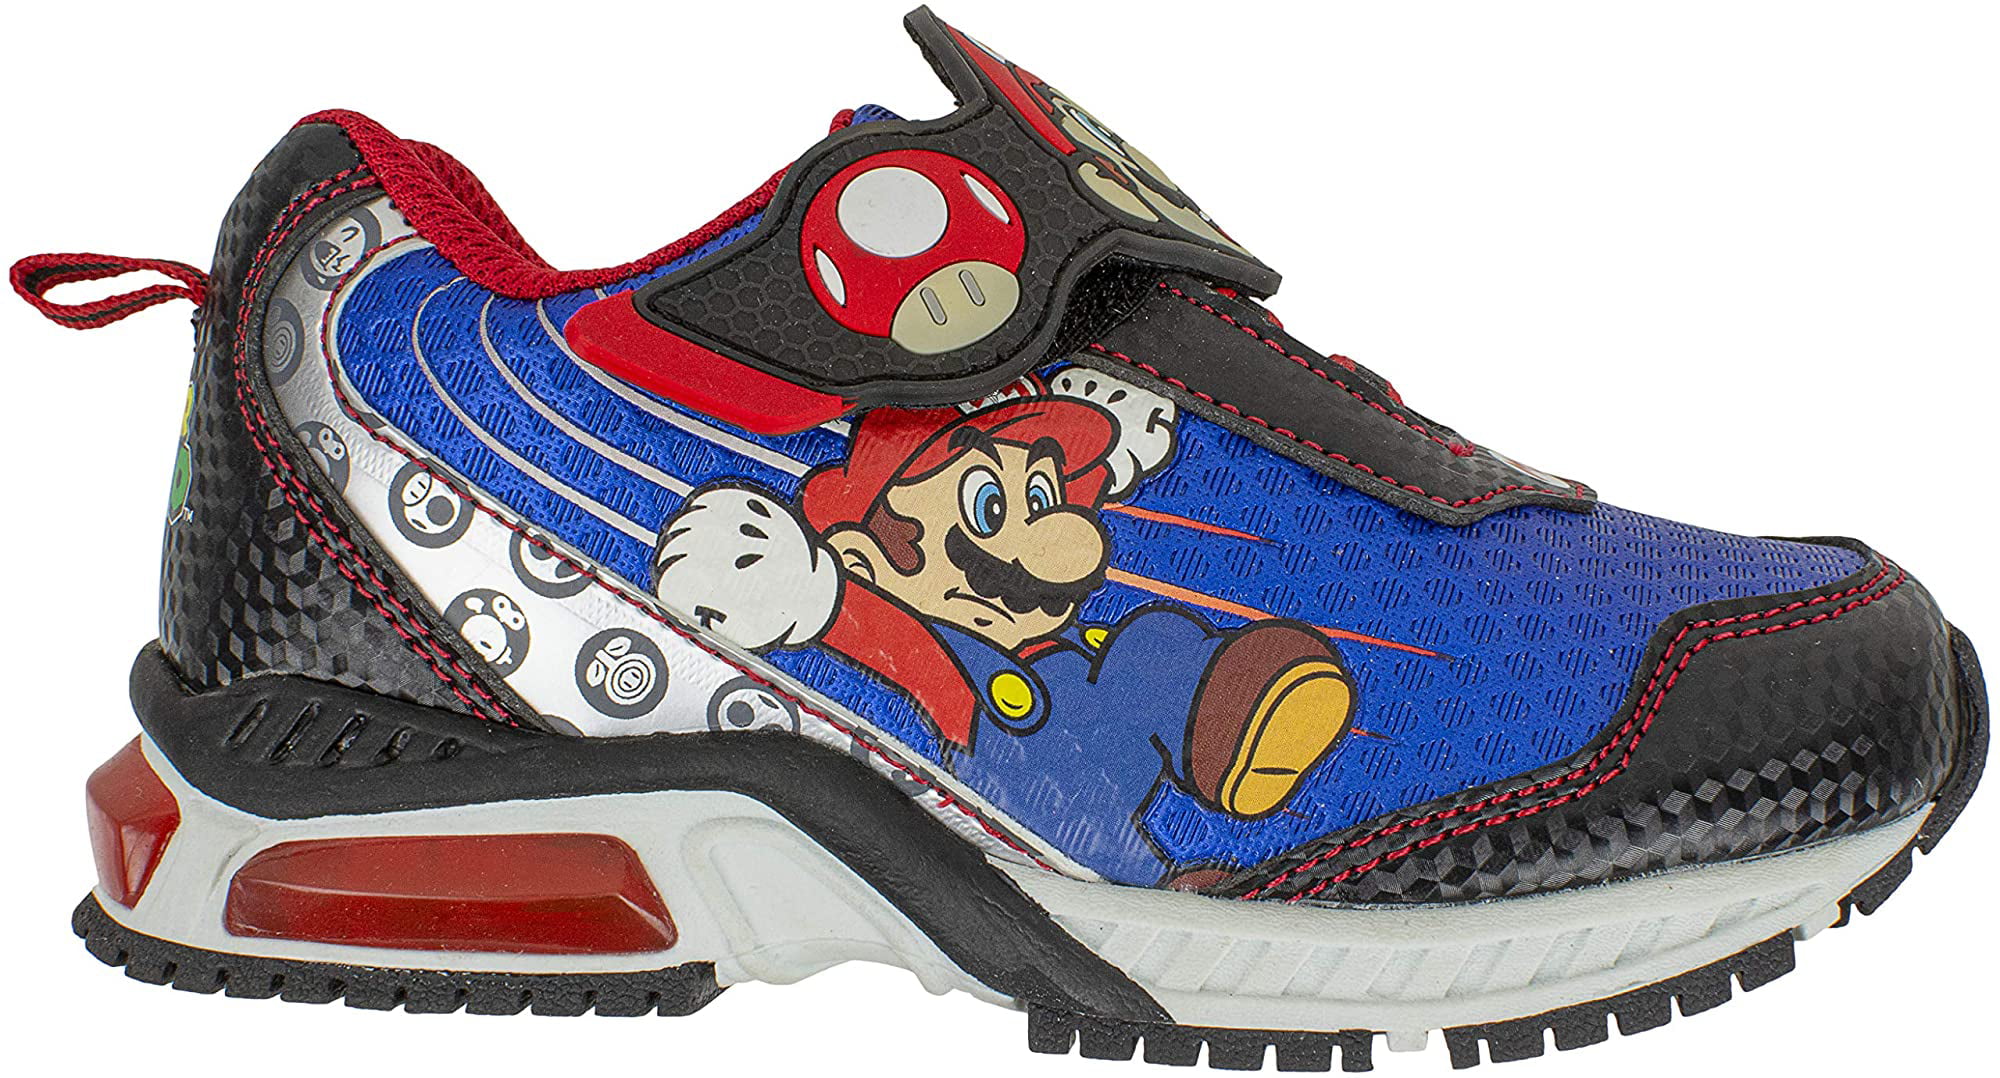 Light Up Sneaker Mix Match Runner Trainer Kids Size 11 to 3 Super Mario Brothers Mario and Luigi Kids Tennis Shoe 